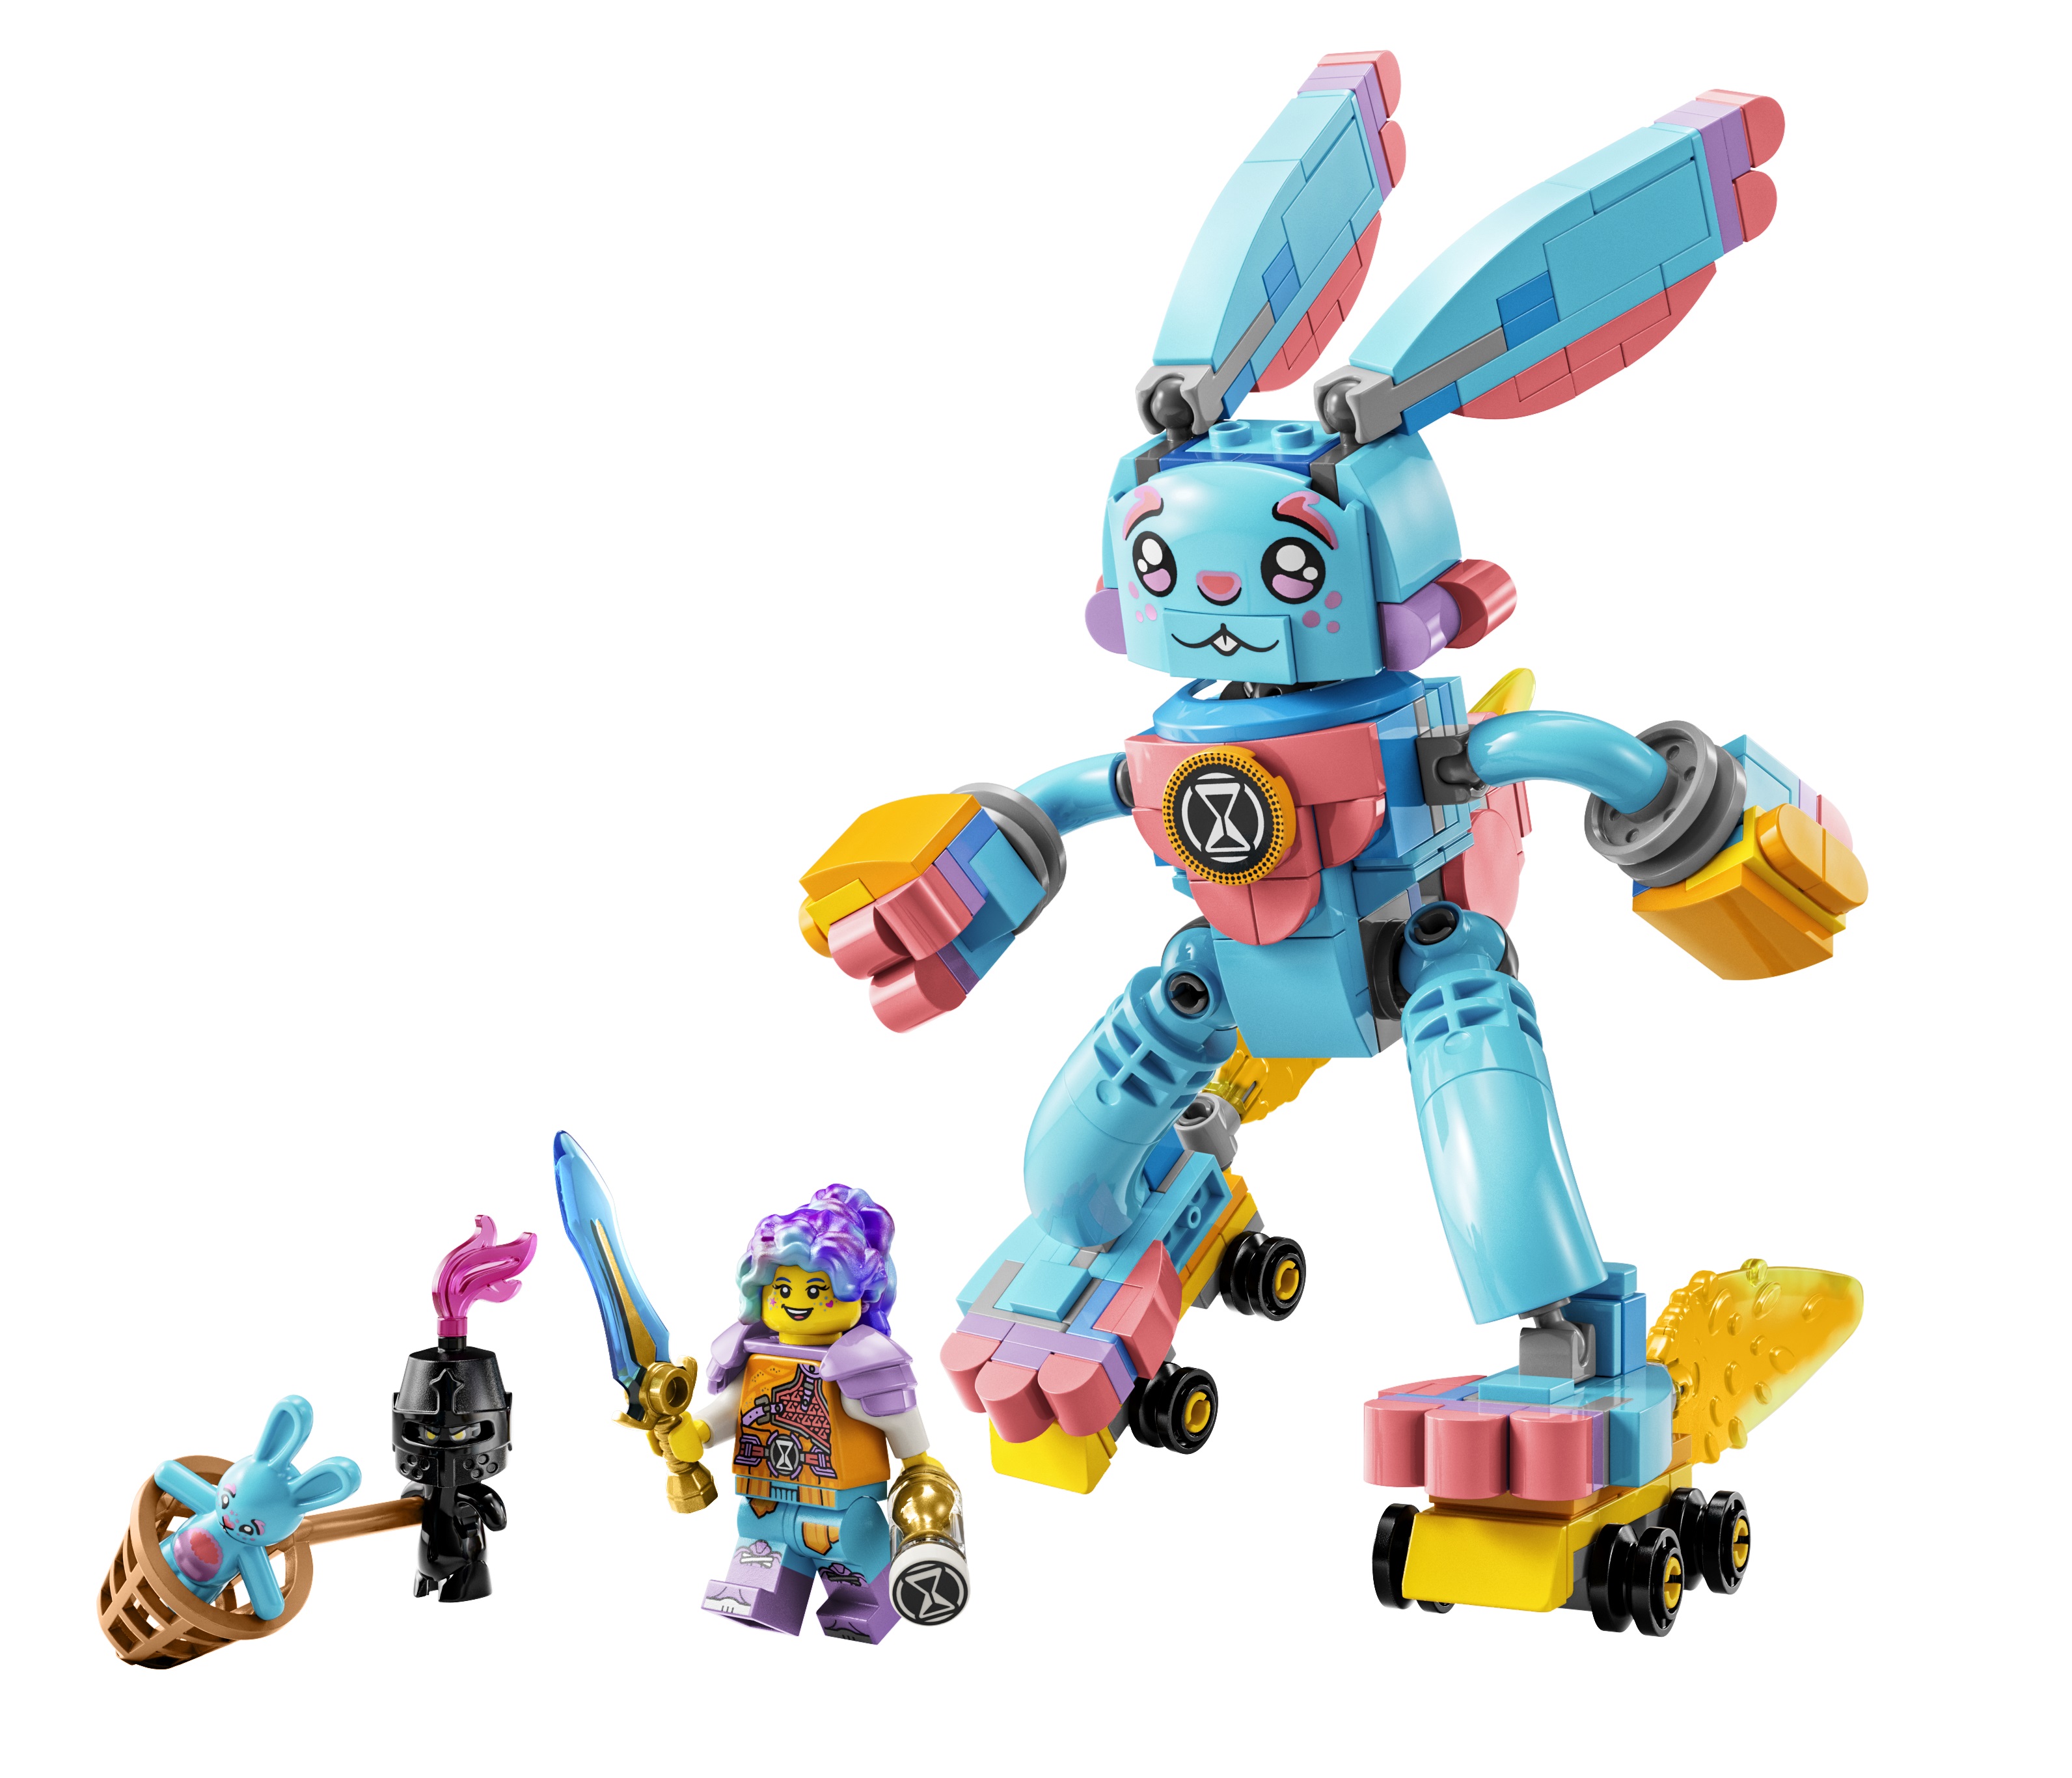 Meet the characters of LEGO DreamZzz before you stream the series online -  Jay's Brick Blog